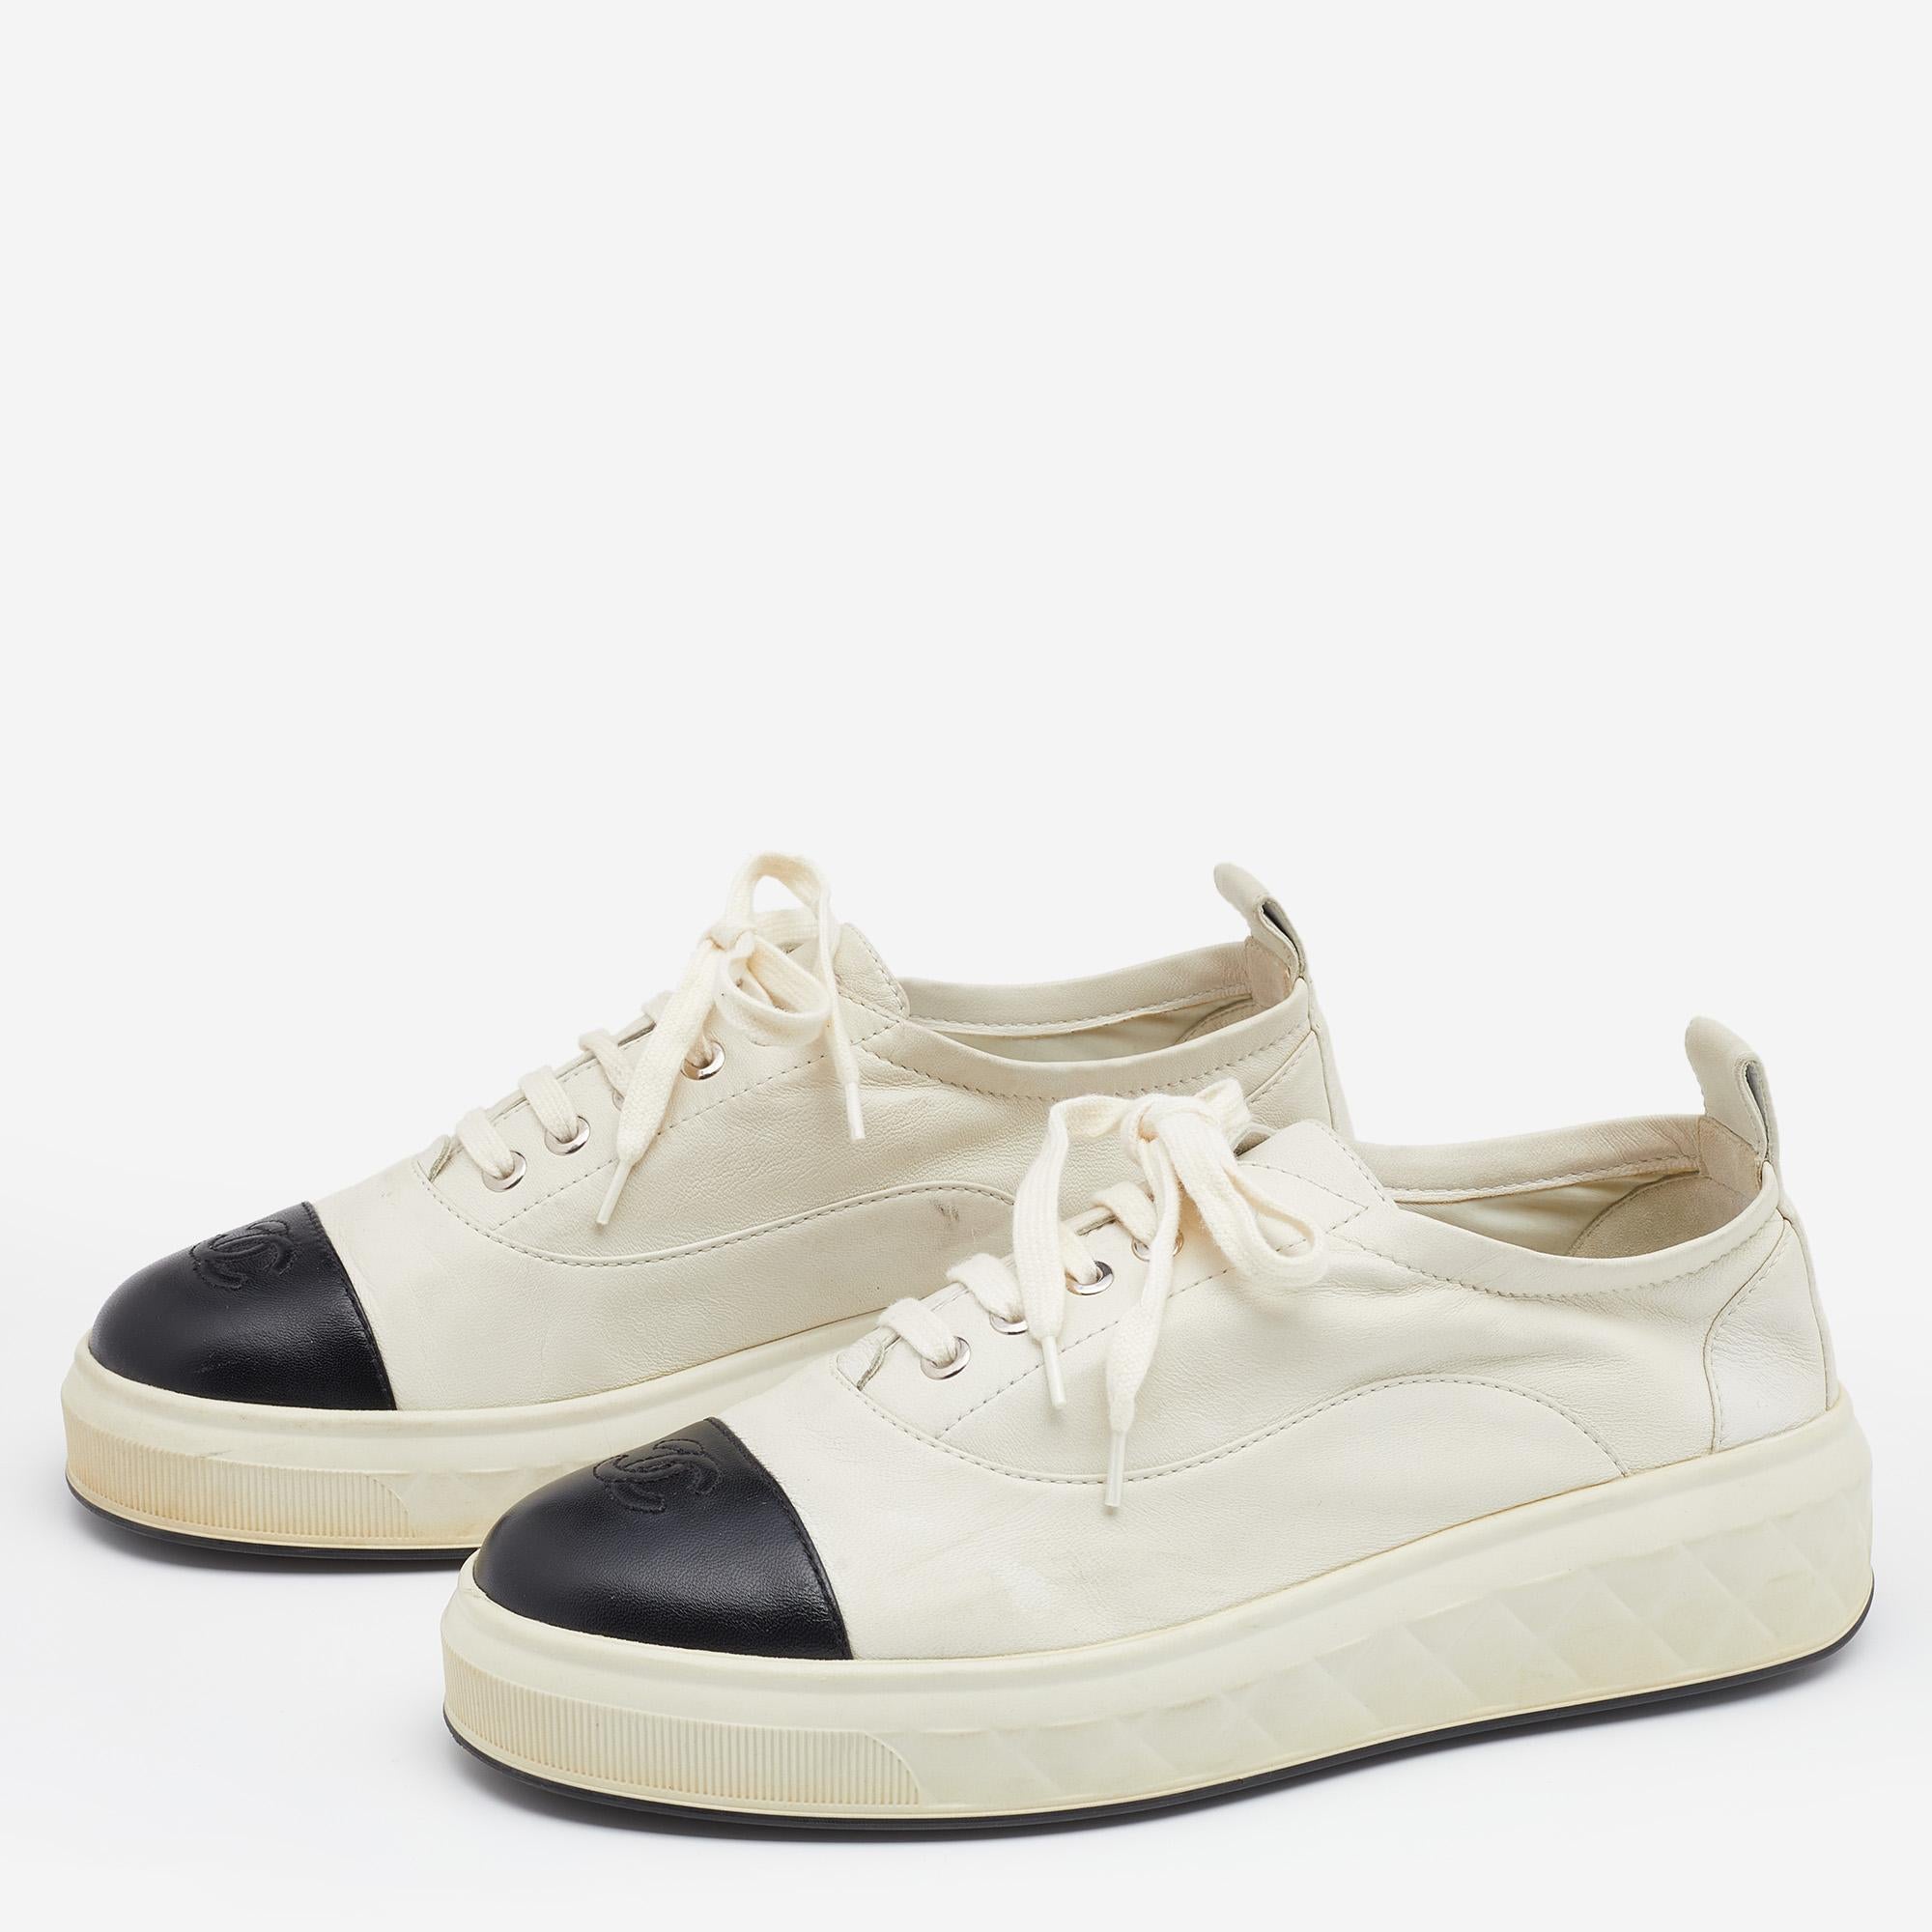 These Oxford sneakers from the House of Chanel are here to grant your feet the ultimate comfortable experience. They are crafted from off-white and black leather and flaunt lace-up fastenings, silver-tone hardware, and cap toes. Add these trendy